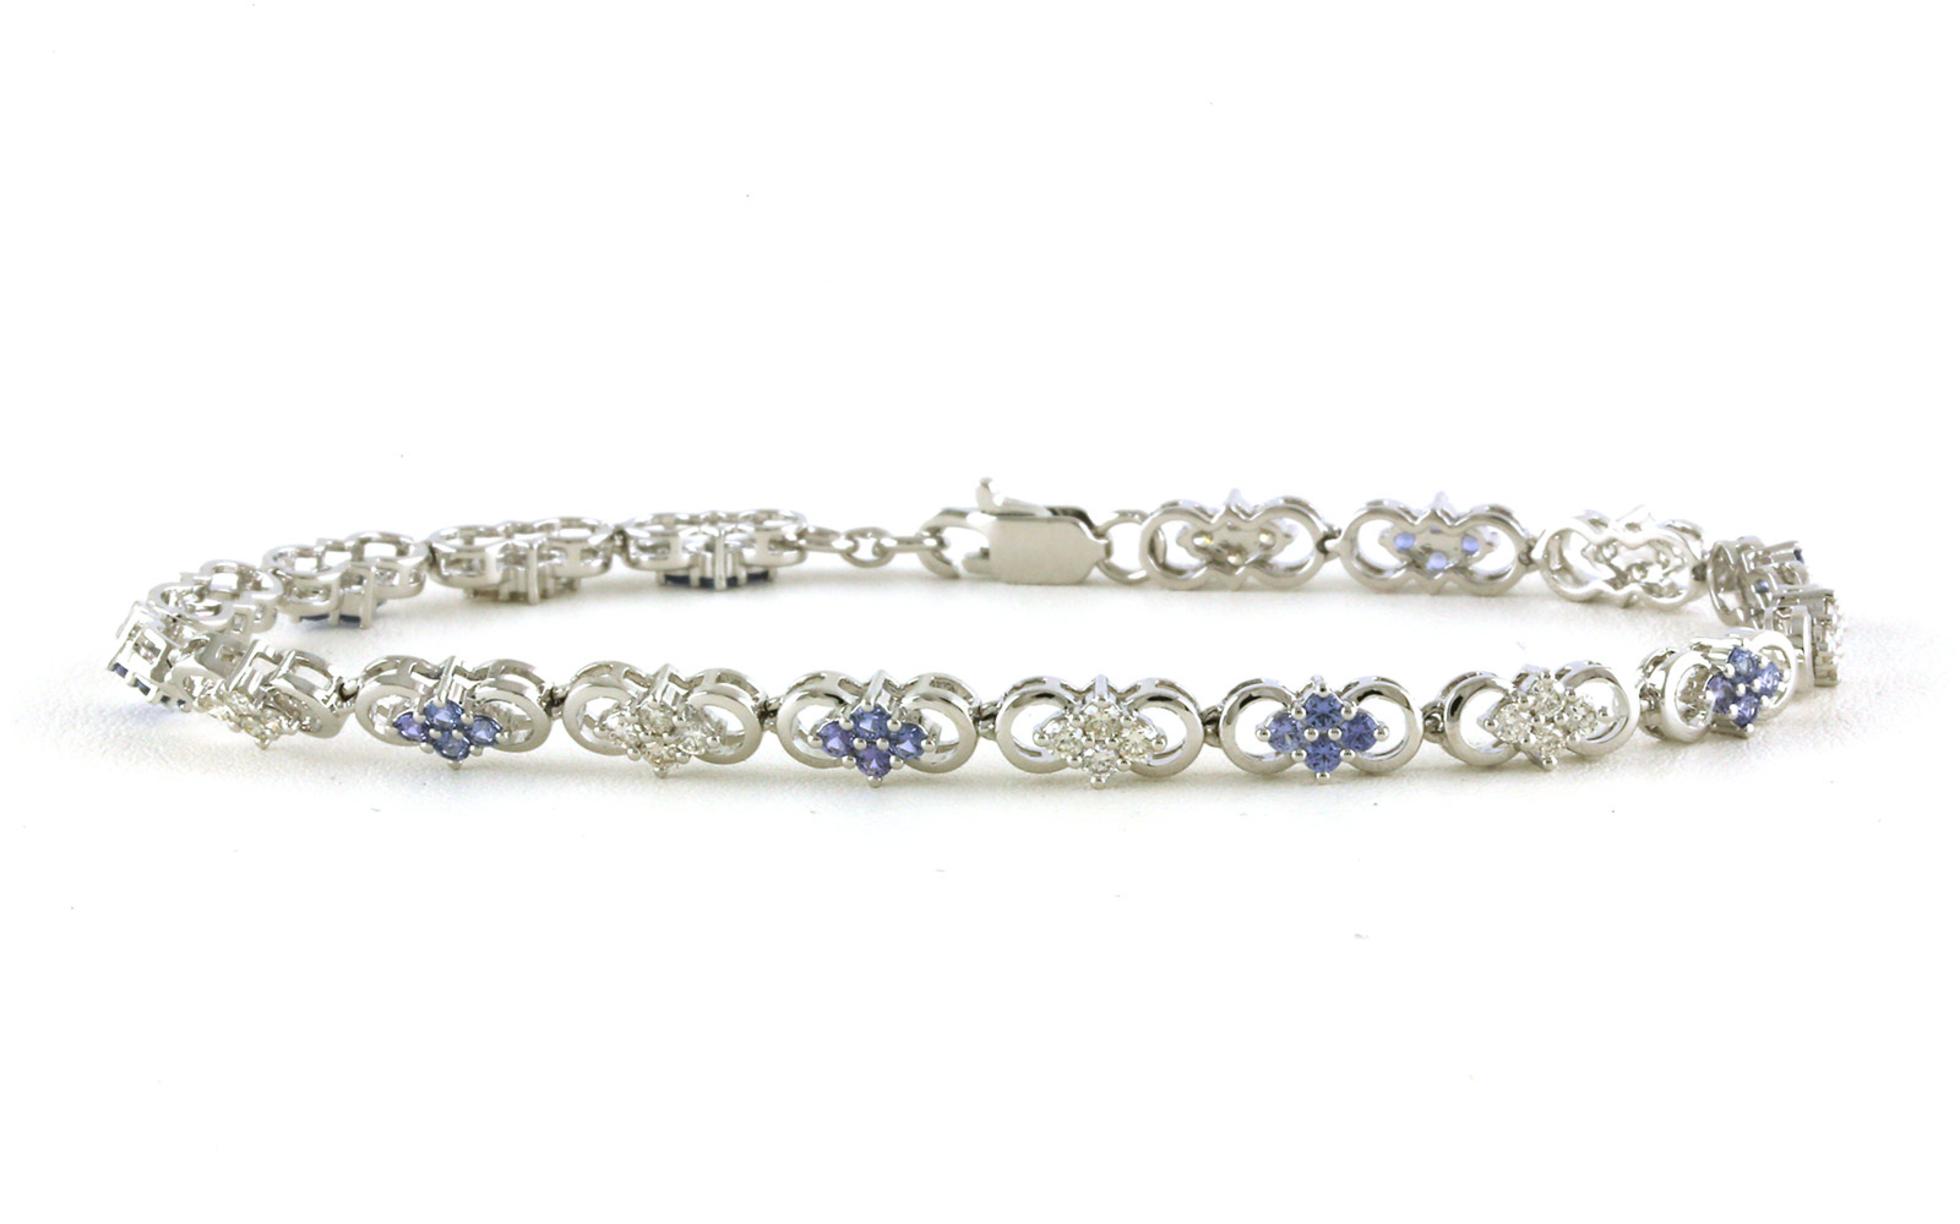 Fancy-link Cluster-style Montana Yogo Sapphire and Diamond Bracelet in White Gold (1.55cts TWT)